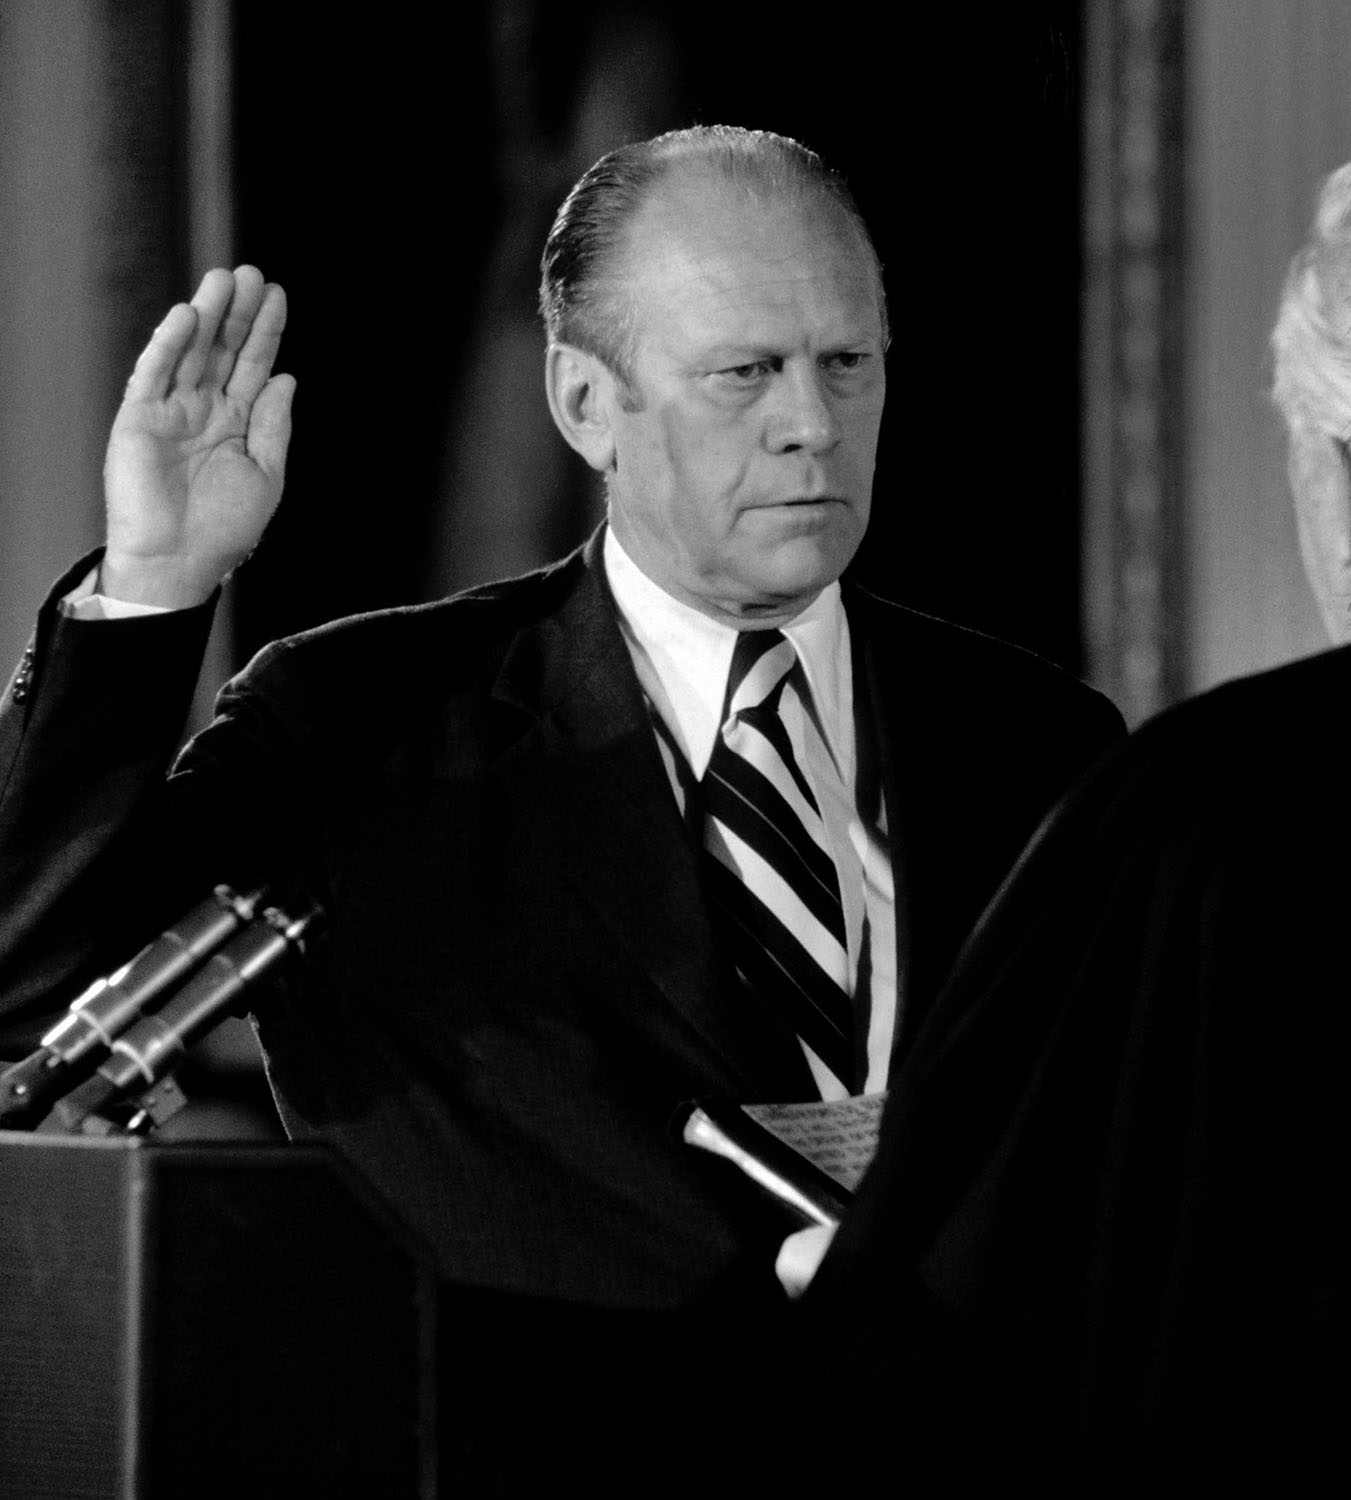 Gerald R. Ford Sworn in as President, East Room of the White House, August 9, 1974